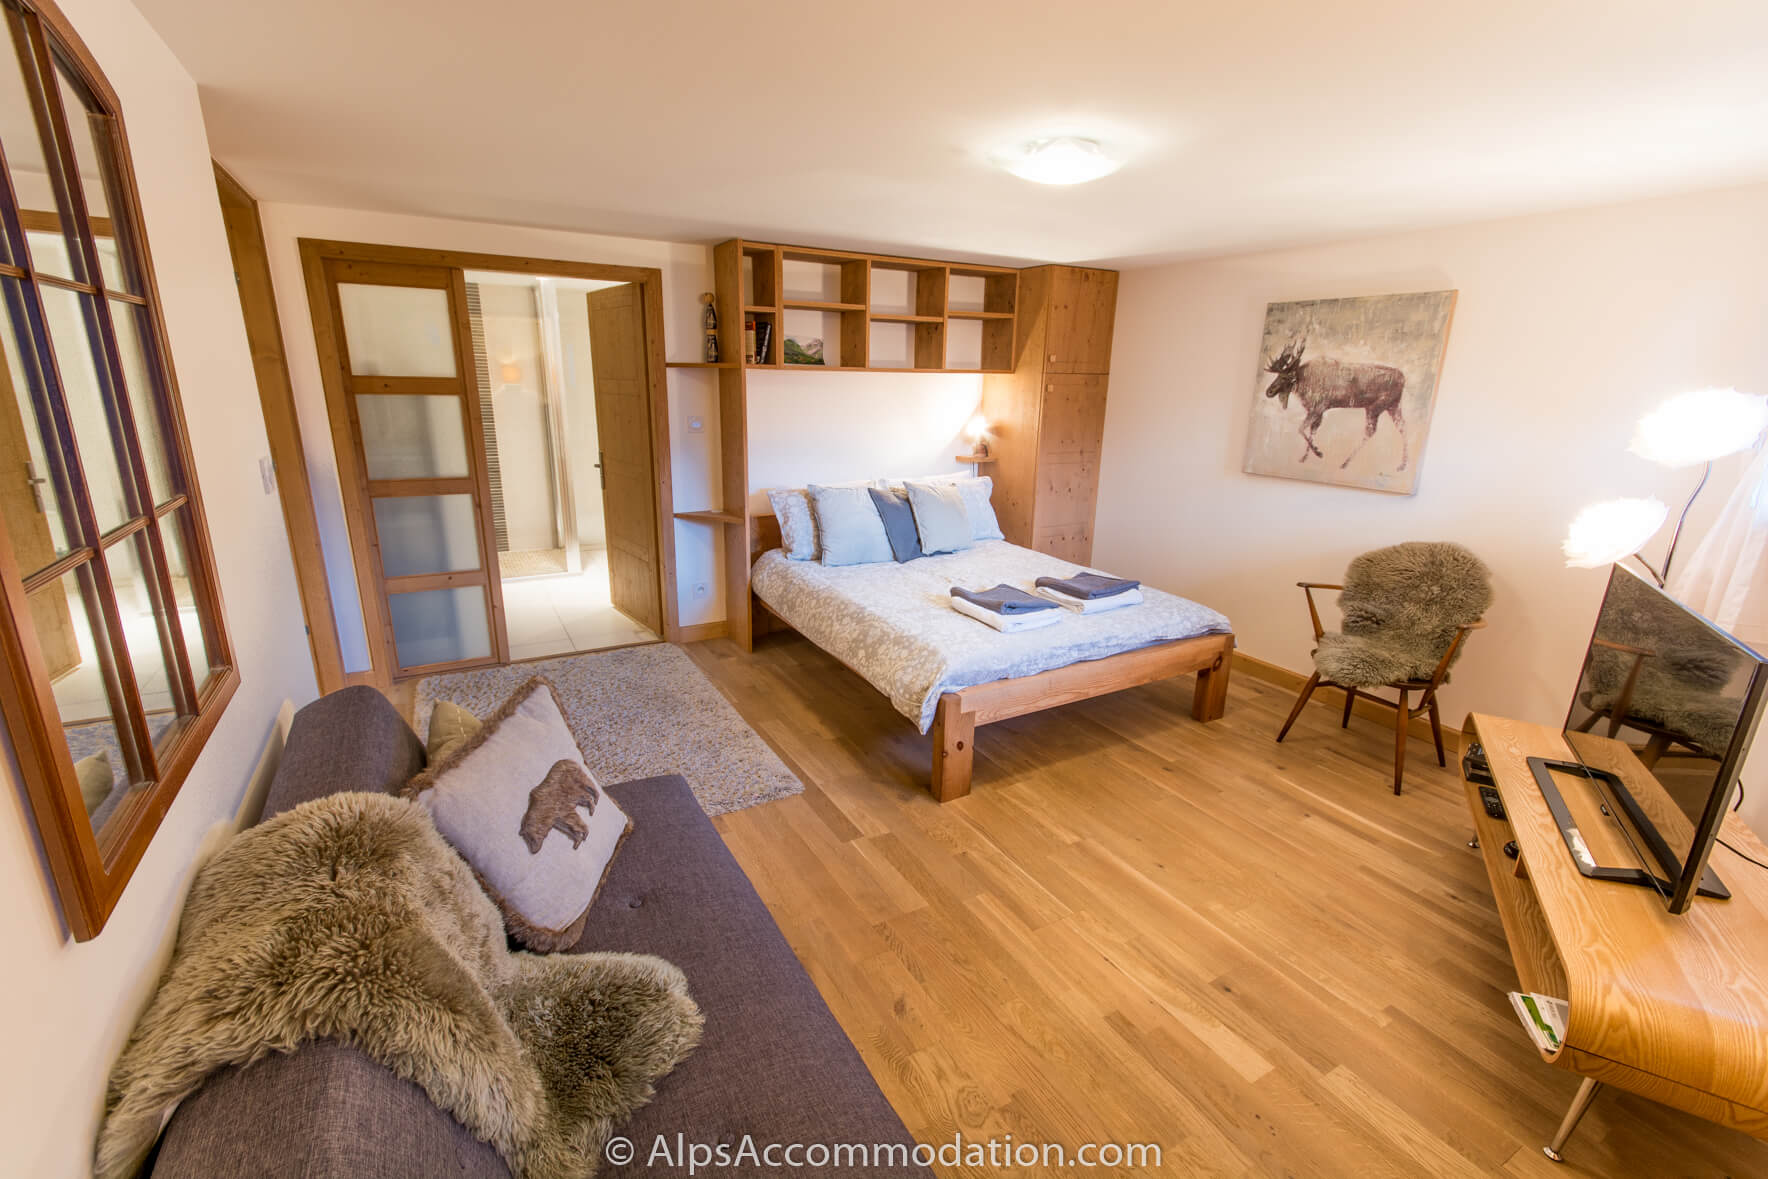 Chalet 75 Samoëns - Spacious double ensuite bedroom with sofa bed and private entrance